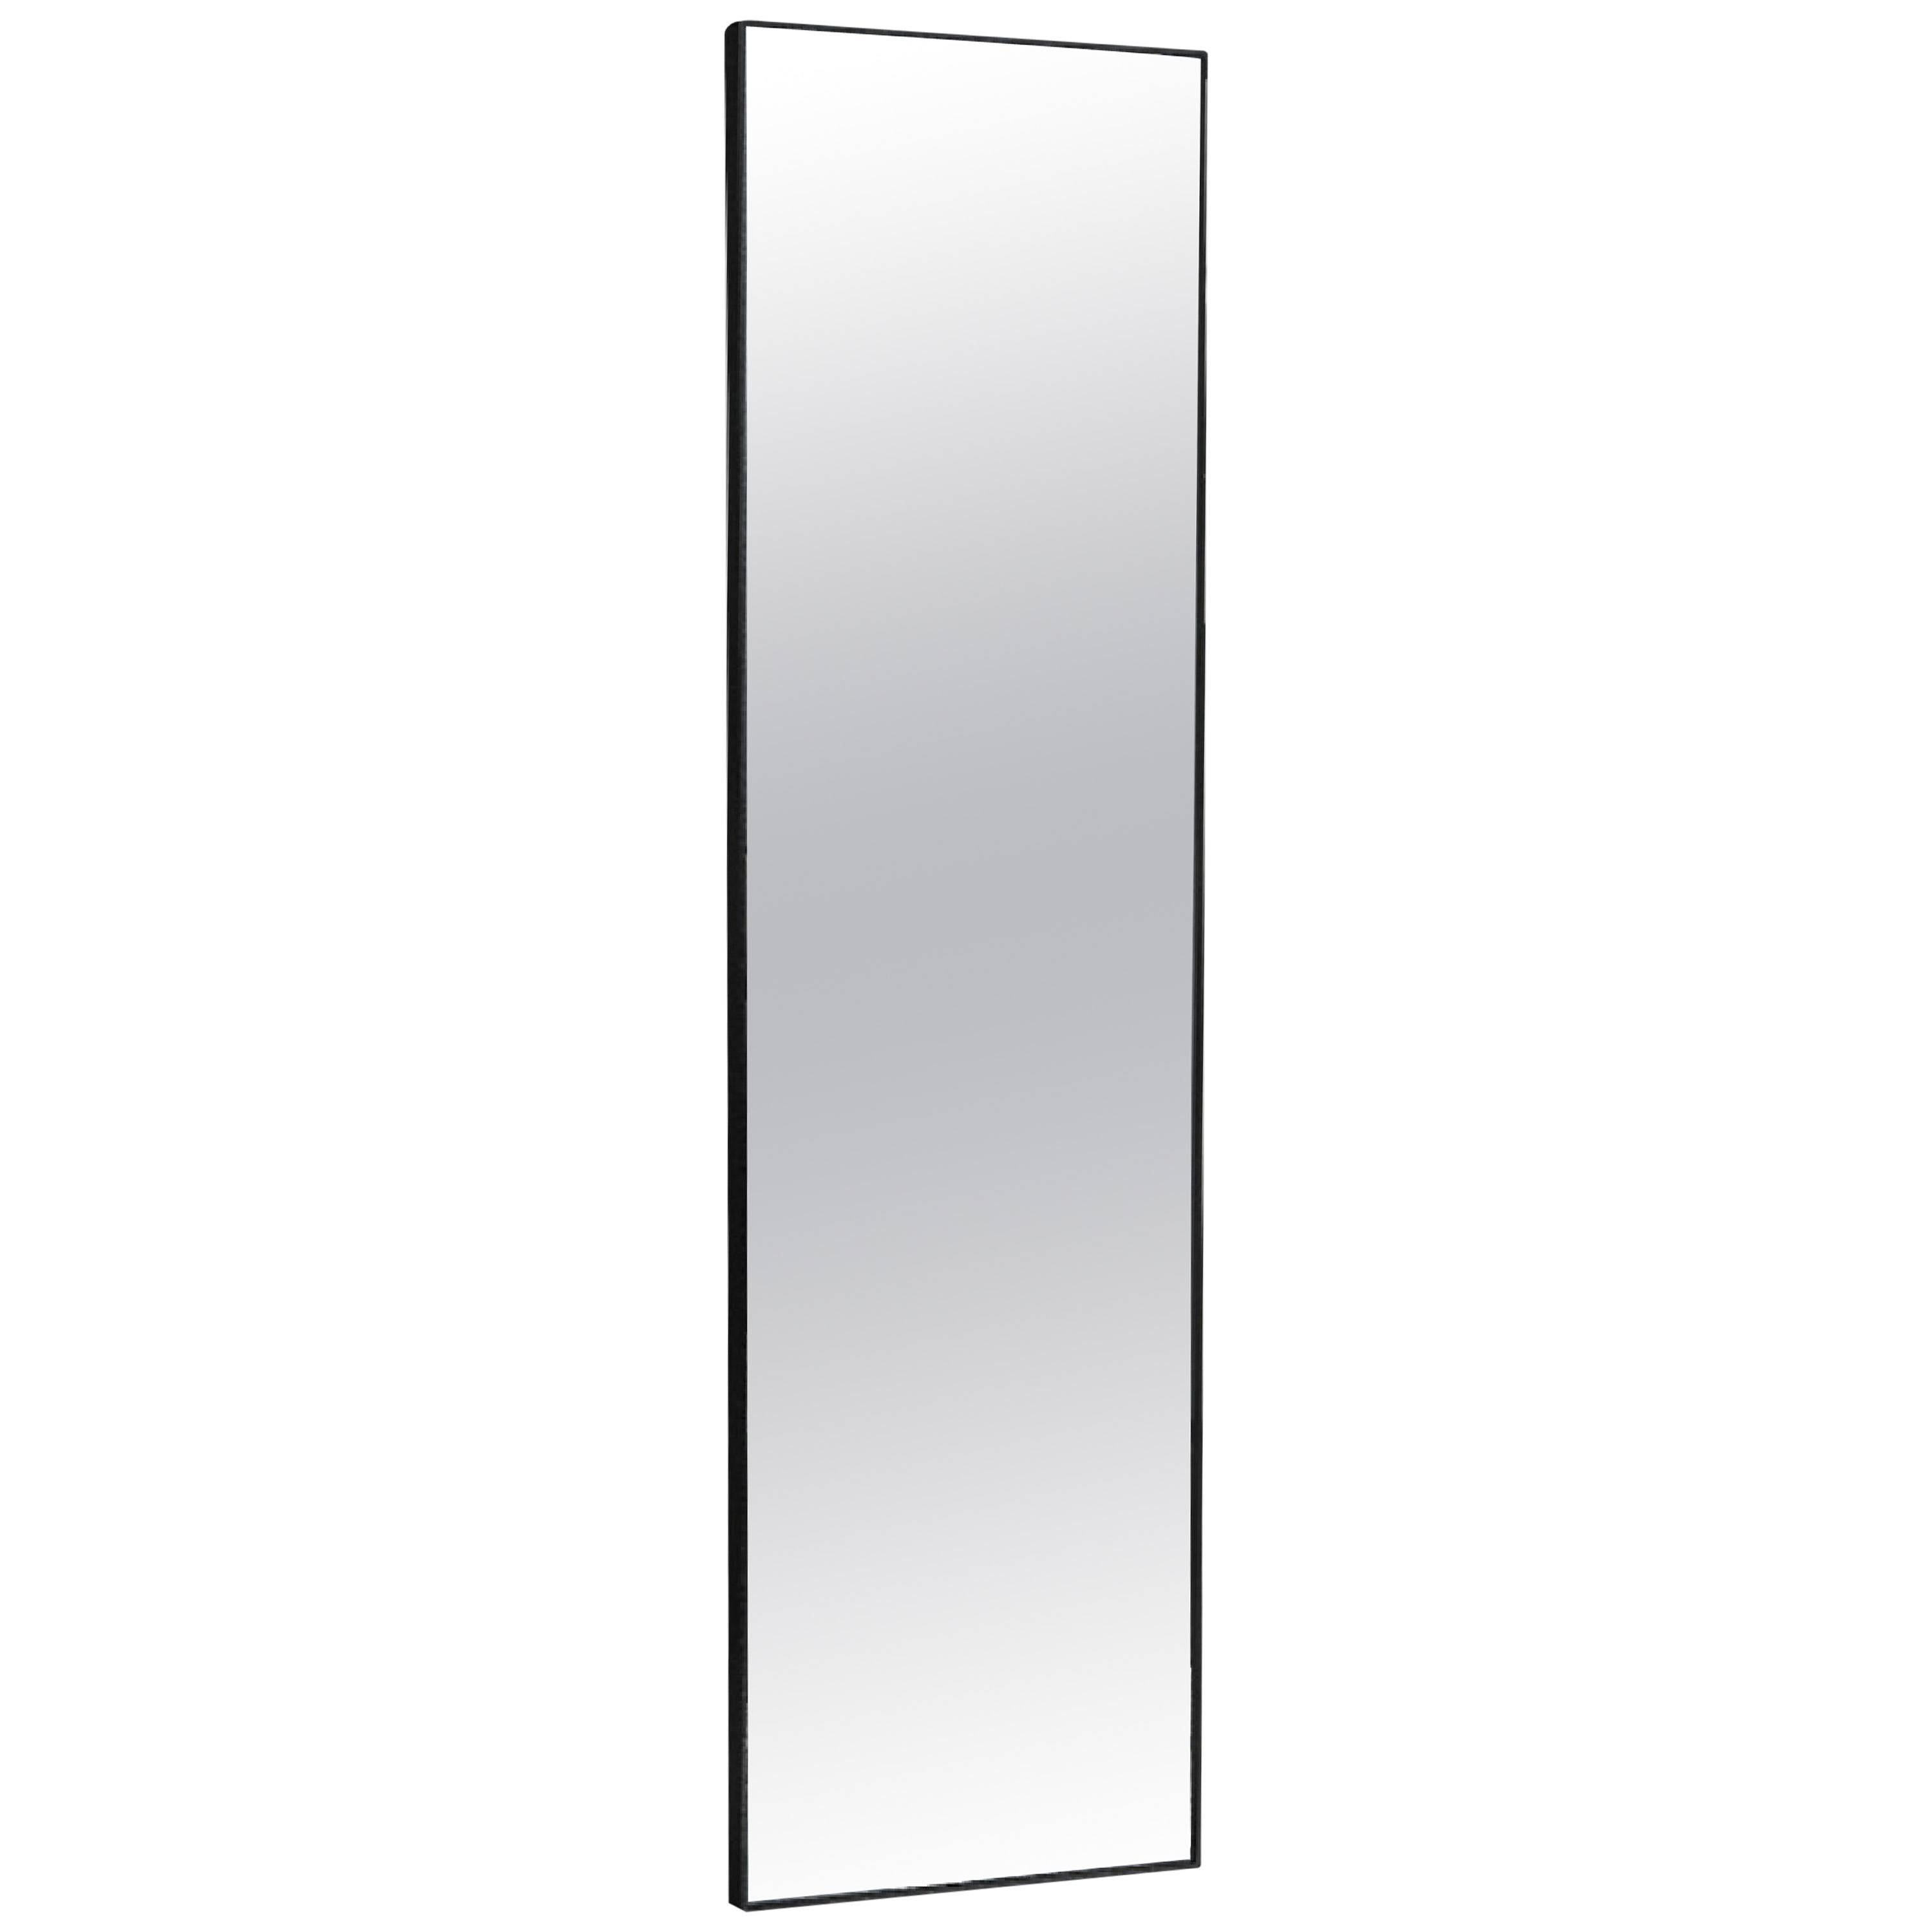 A wall-mounted tri-fold mirror system that makes the ritual of dressing, preparation and personal storage a pure pleasure. It can be placed in both public or private settings of a dwelling. It transforms to a tri-fold mirror that allows someone